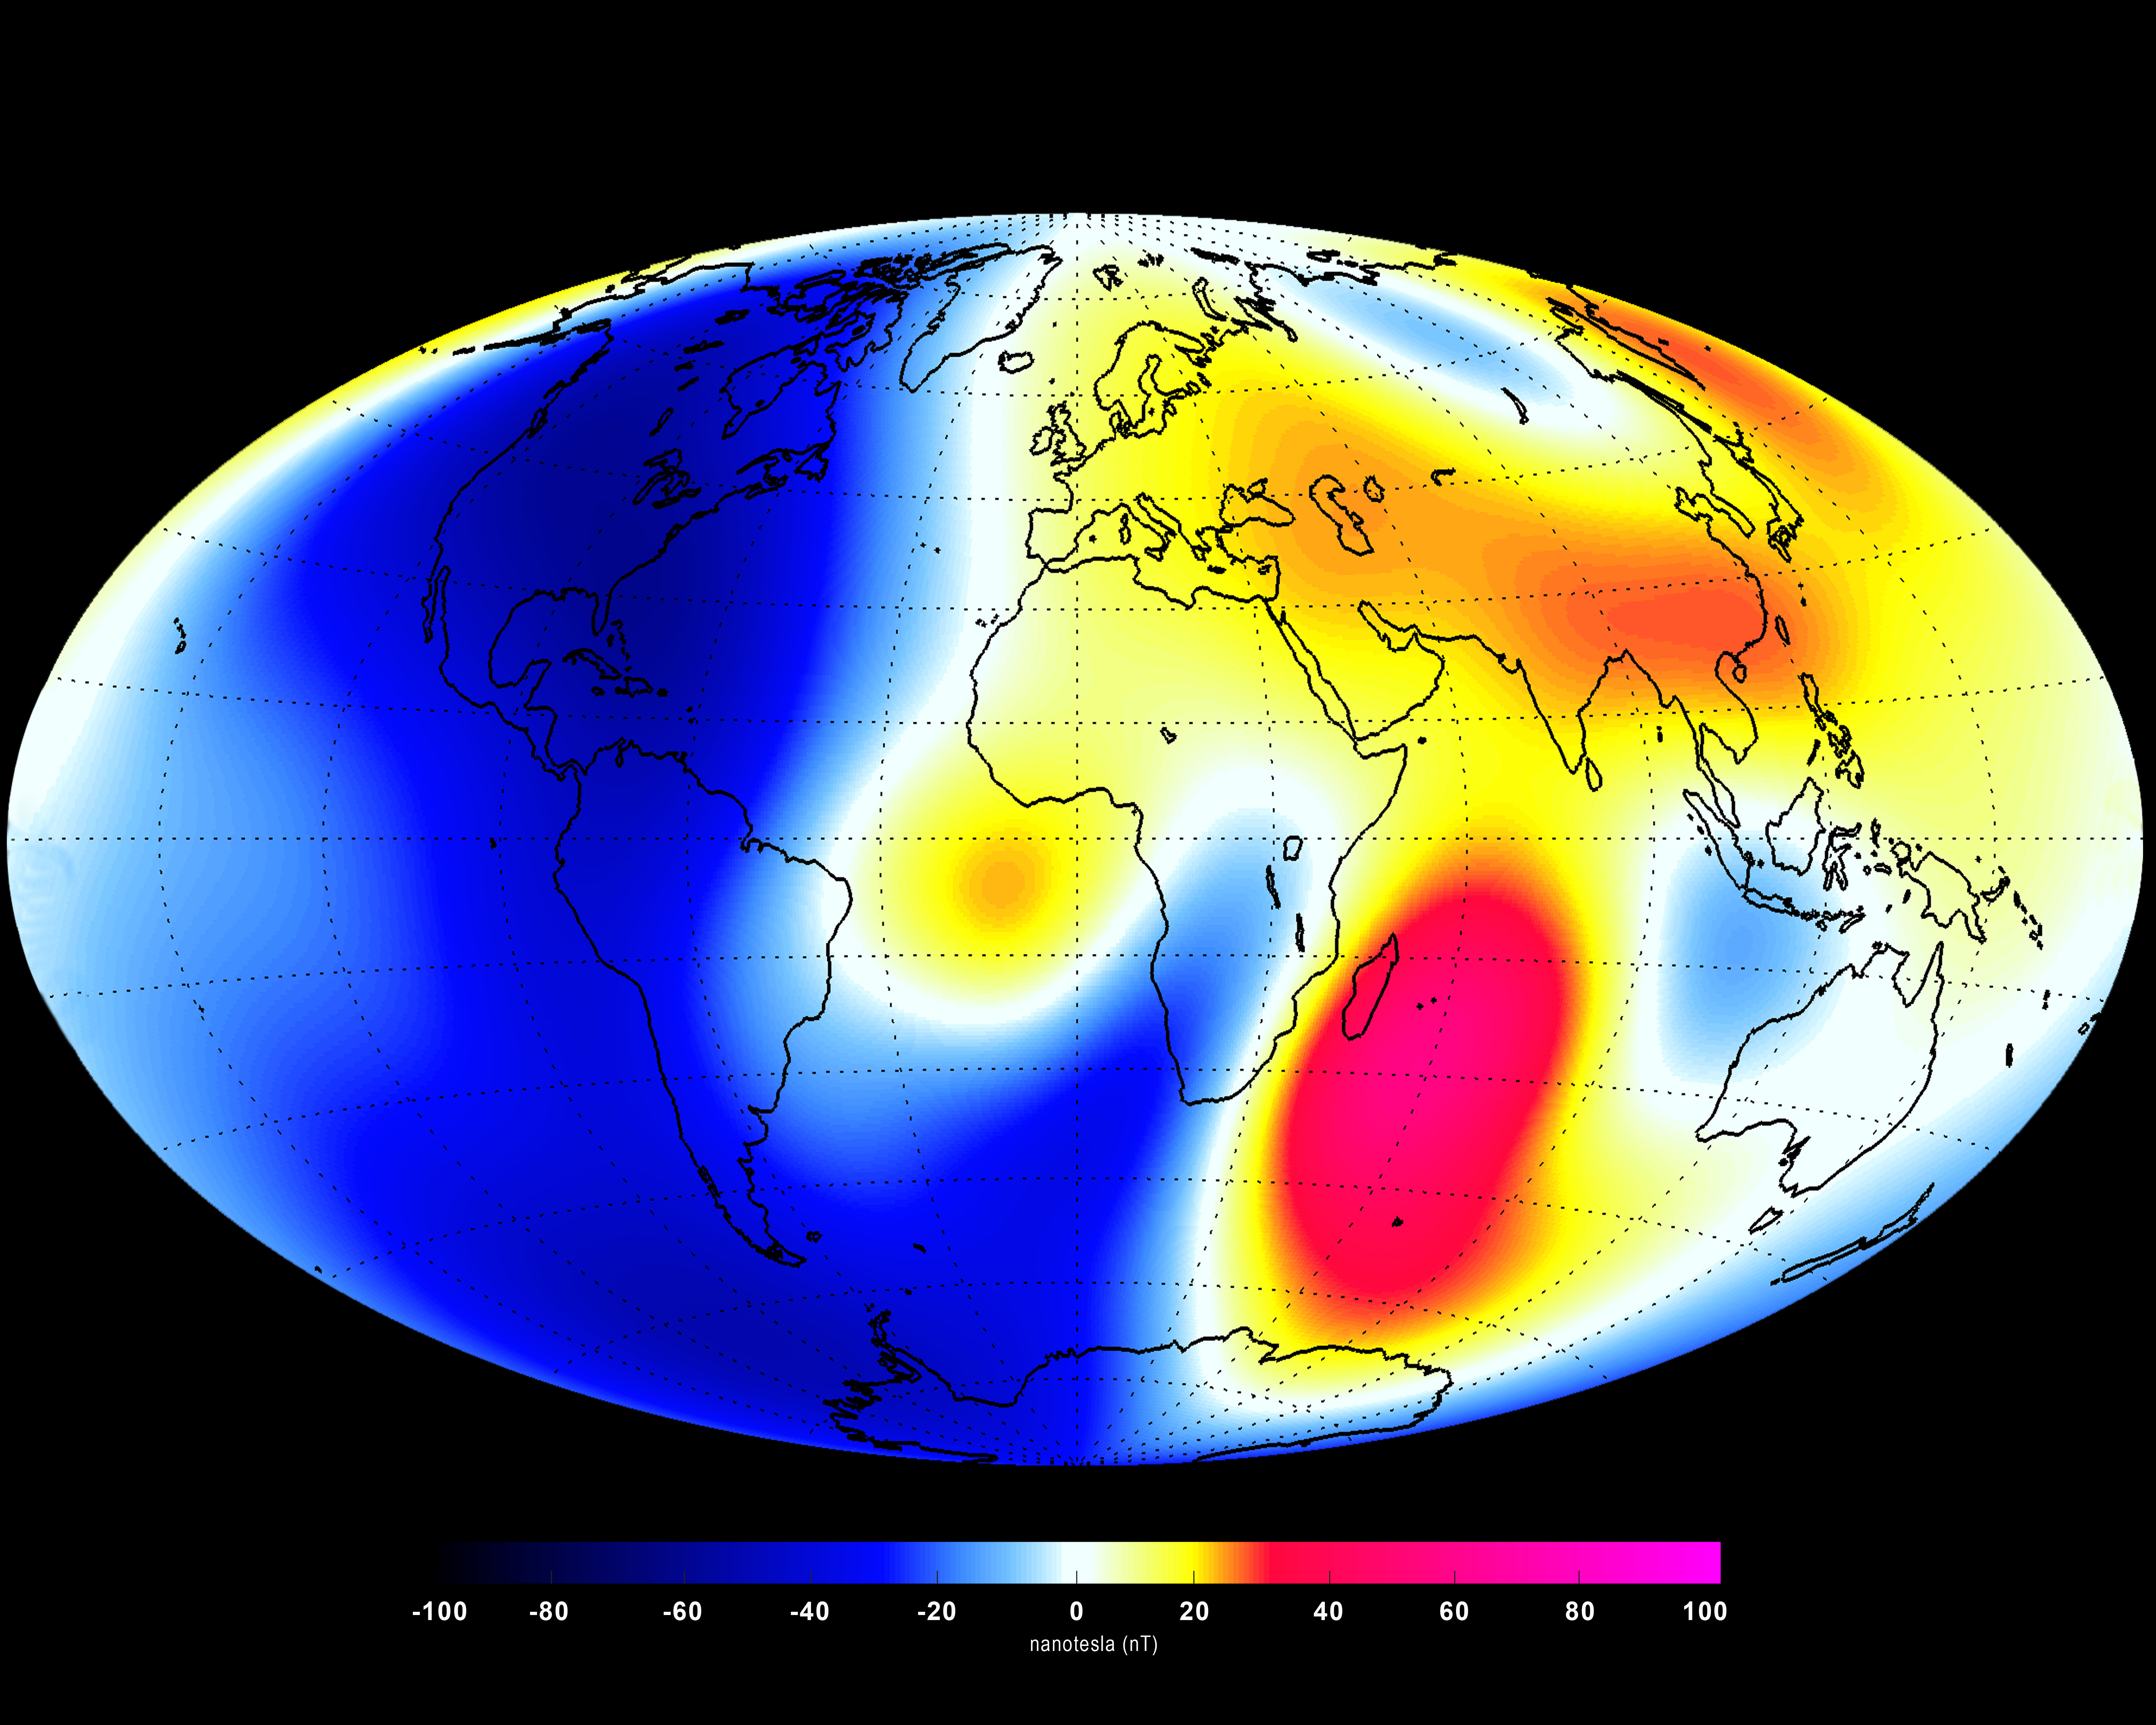 Image showing changes in Earth's magnetic field between January 1 and June 20, 2014